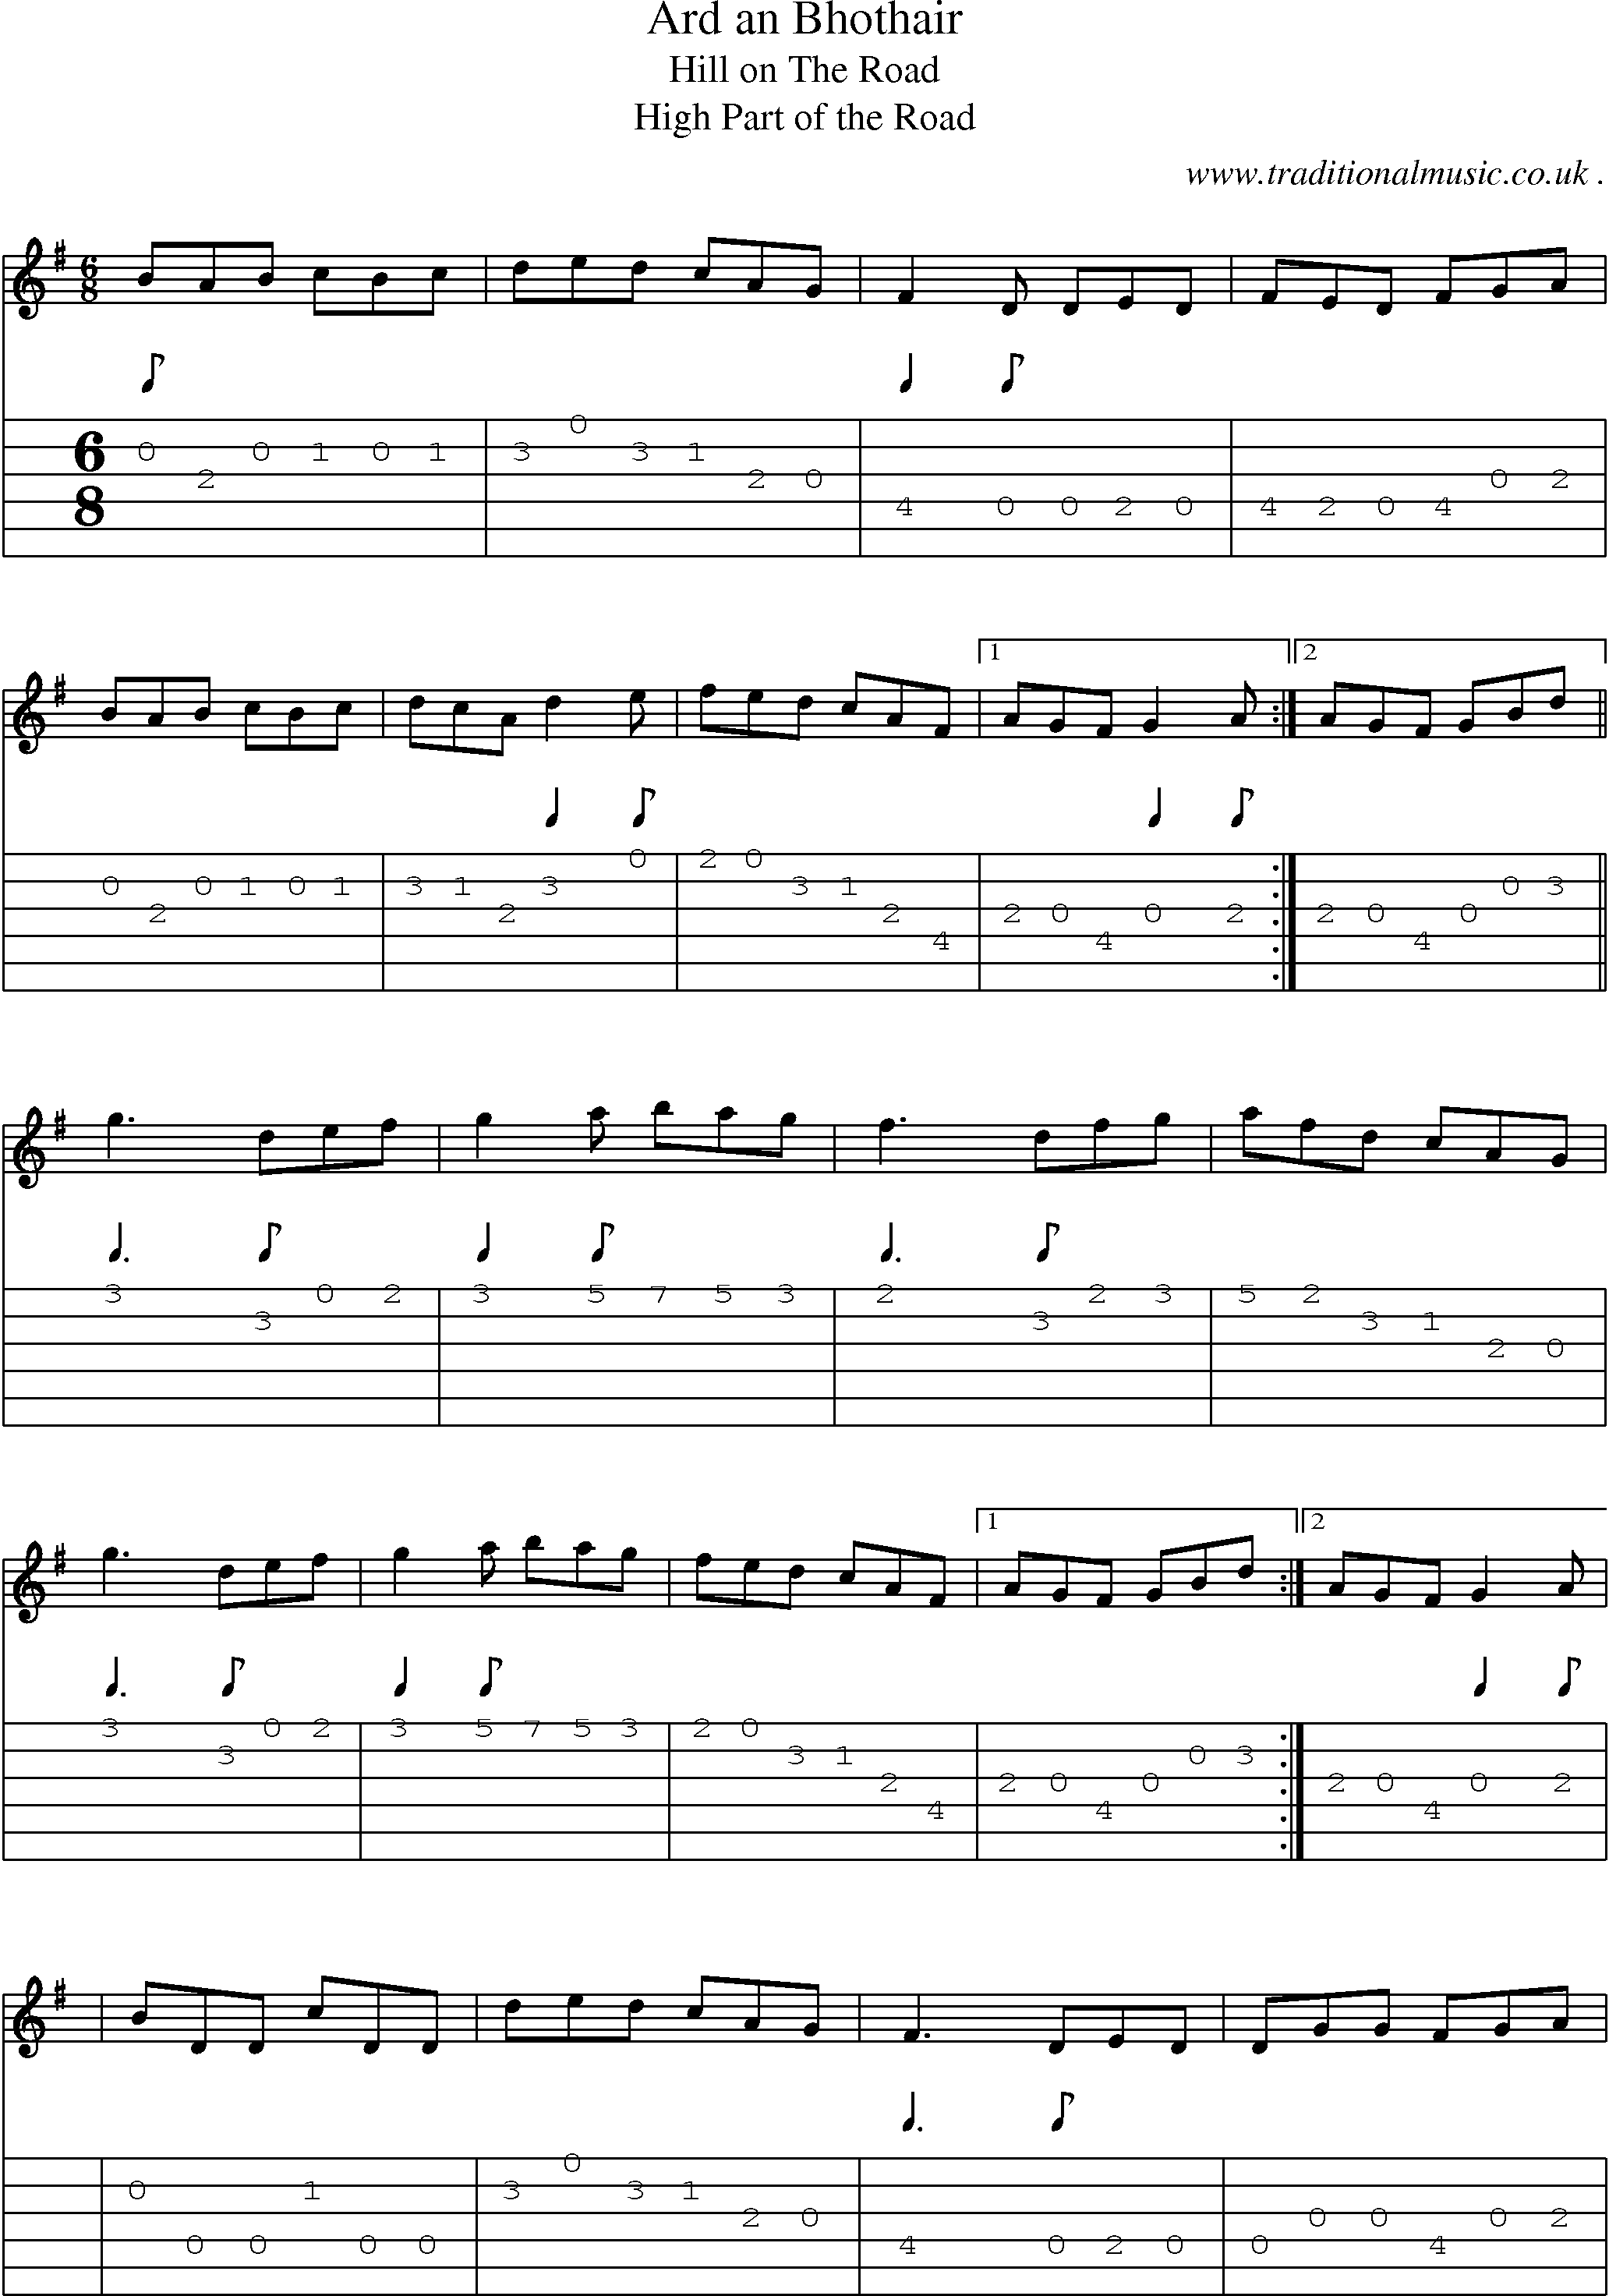 Sheet-Music and Guitar Tabs for Ard An Bhothair